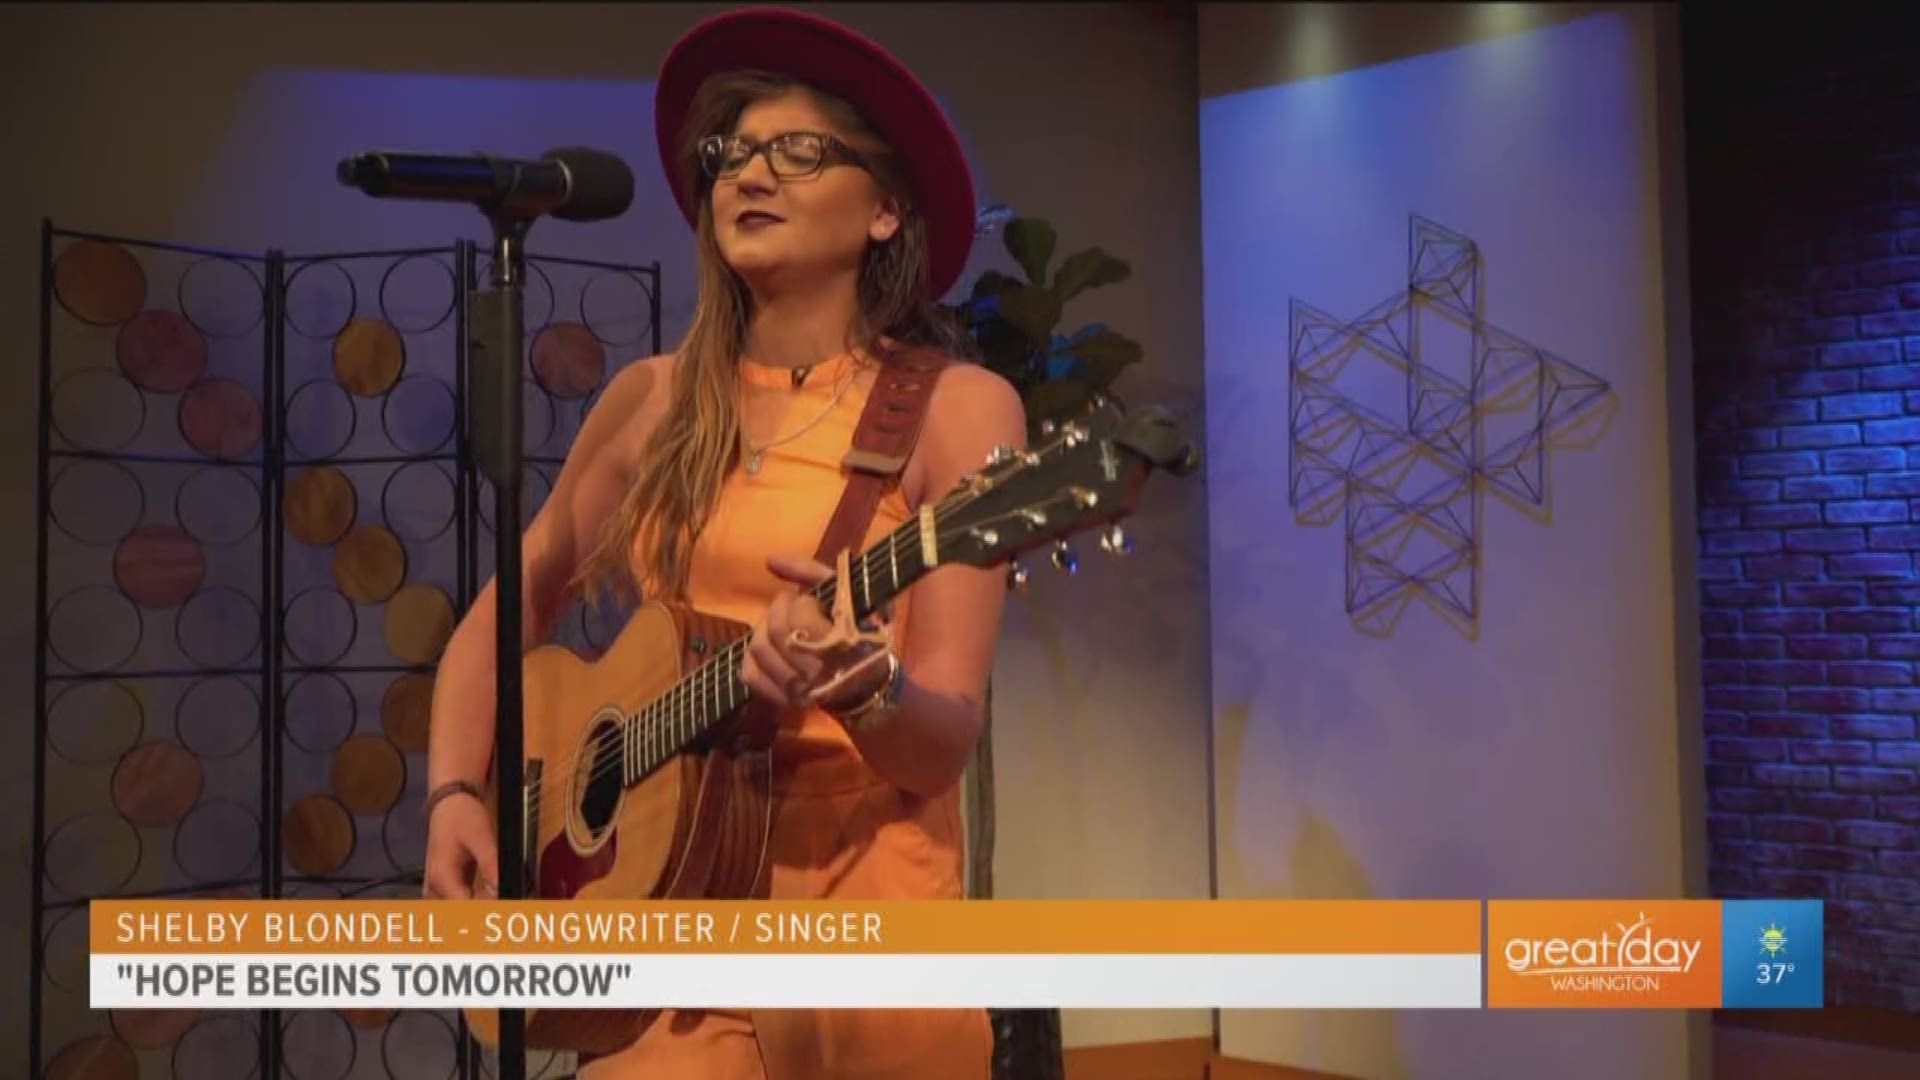 Watch Shelby Blondell perform her song 'Hope Begins Tomorrow' in honor of her mother and others who are currently battling cancer on World Cancer Day.